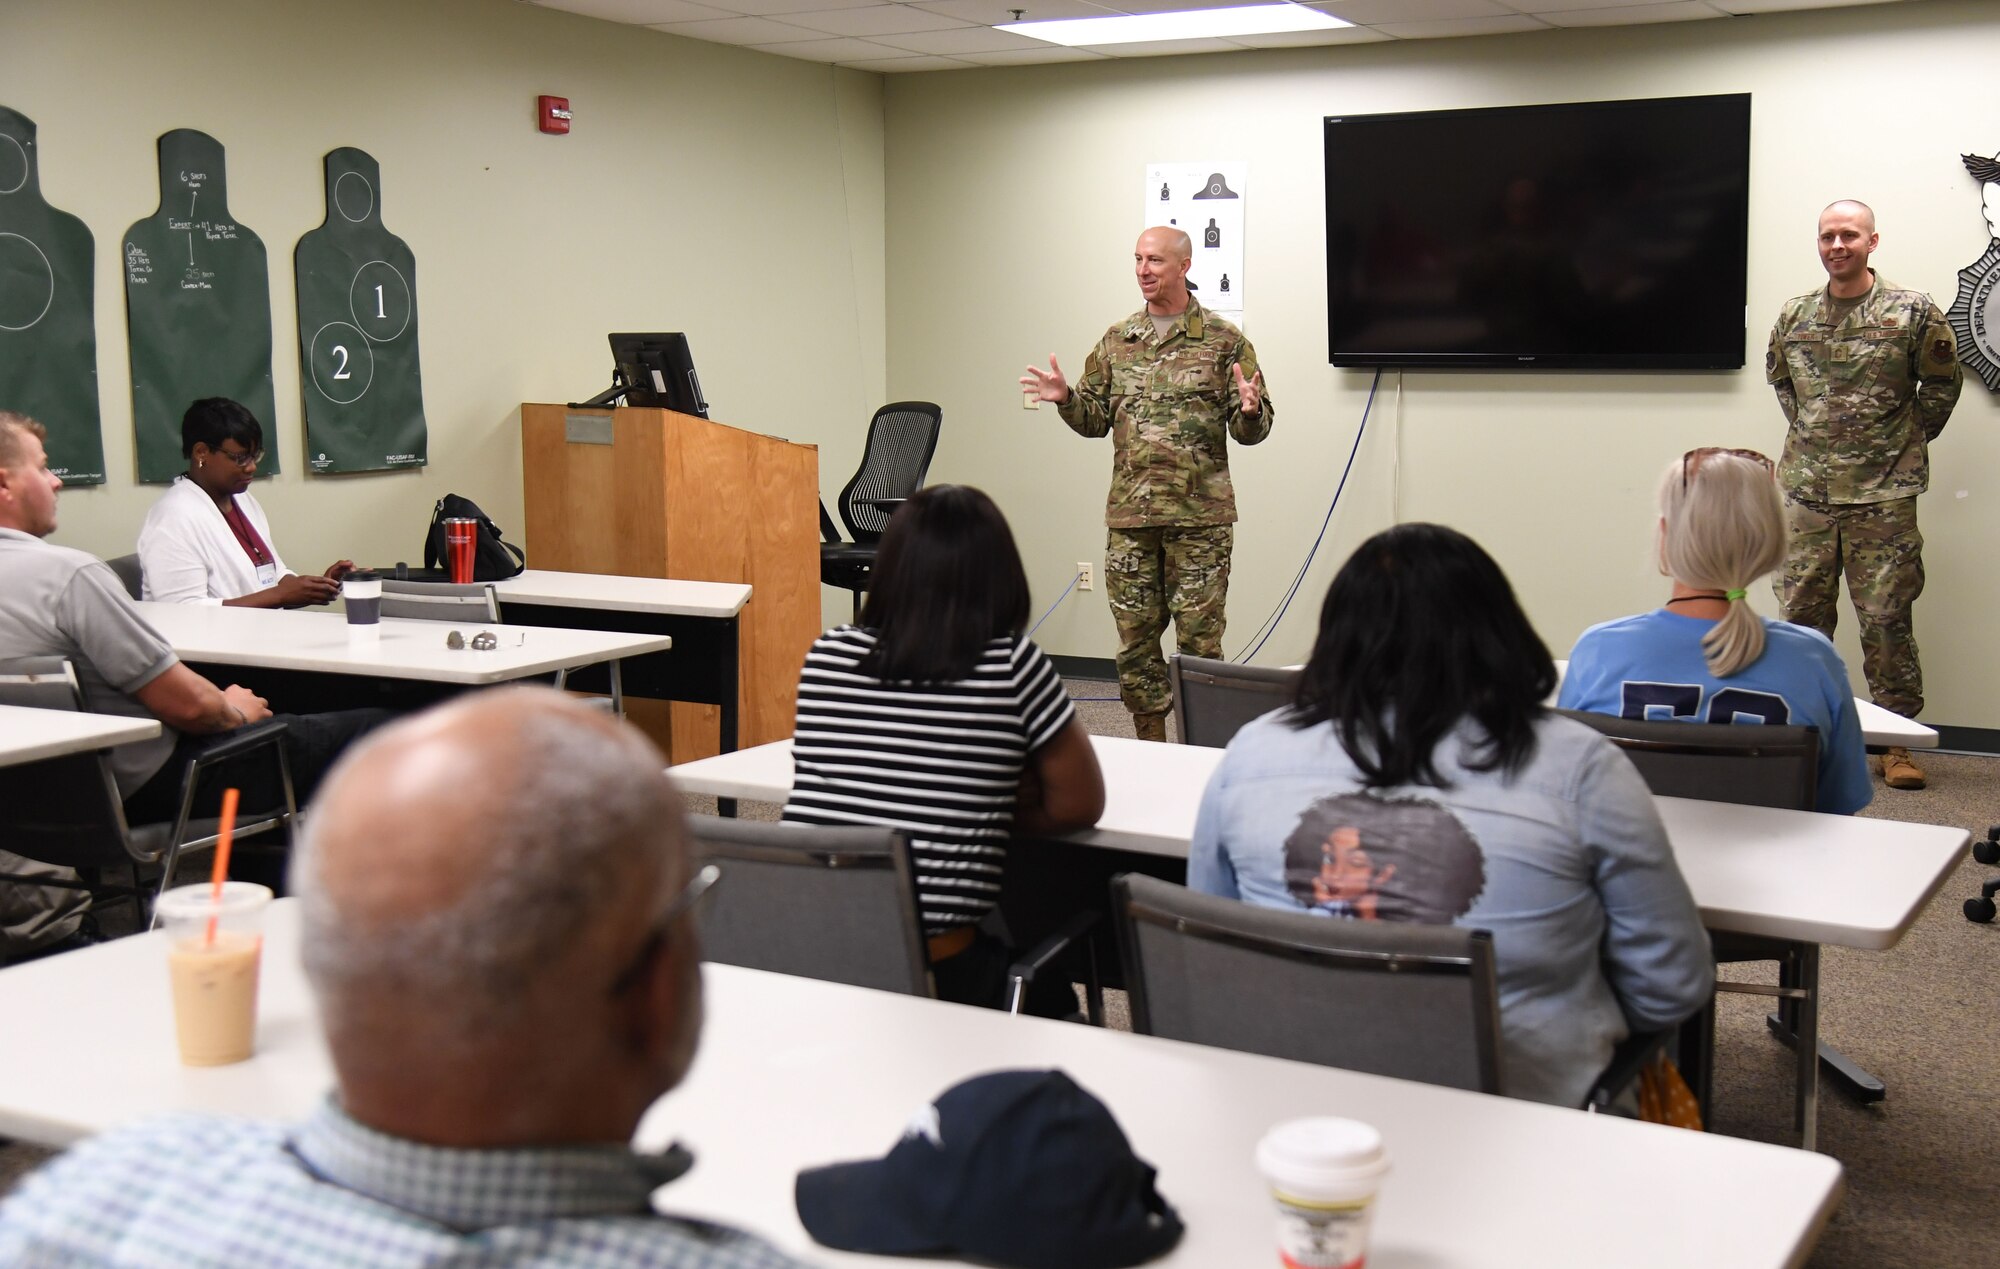 U.S. Air Force Col. William Hunter, 81st Training Wing commander, delivers welcoming remarks during the Mississippi Educators Tour for Law and Public Safety and Fire Science tour inside the 403rd Security Forces Squadron Combat Arms building at Keesler Air Force Base, Mississippi, July 27, 2022. More than 30 educators also toured the Keesler Fire Department and received a military working dog demonstration. (U.S. Air Force photo by Kemberly Groue)